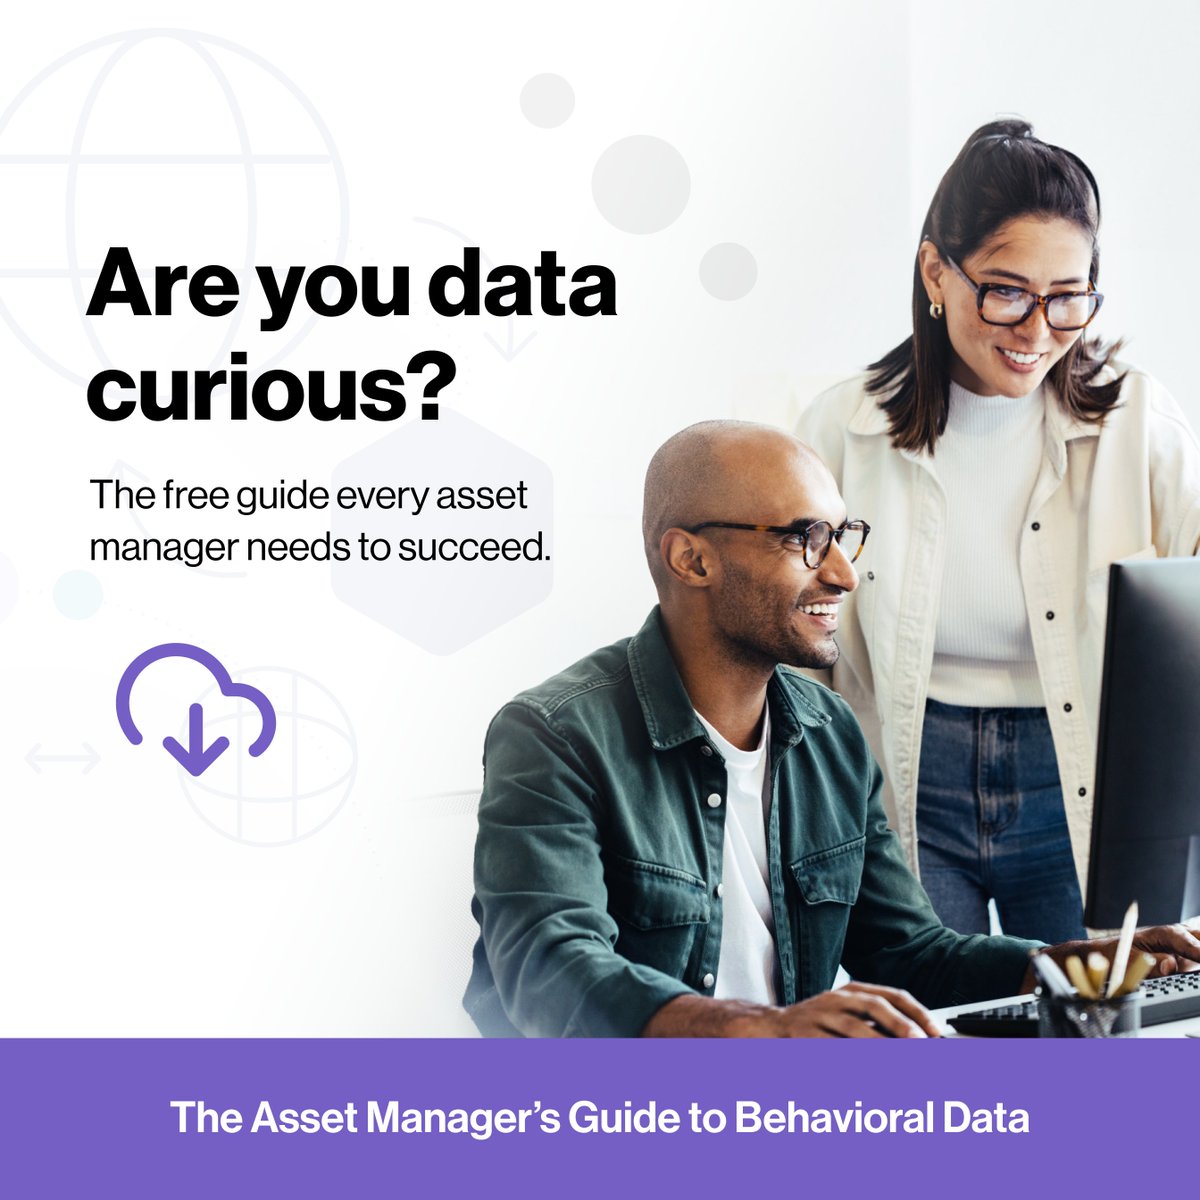 In an era overflowing with products and issuers, #AssetManagers aiming for distinction must harness every available tool.

🌐 In today's data-driven world, behavioral data holds the key. Our latest guide will help your teams:
- Understand the importance of behavioral data.
-…